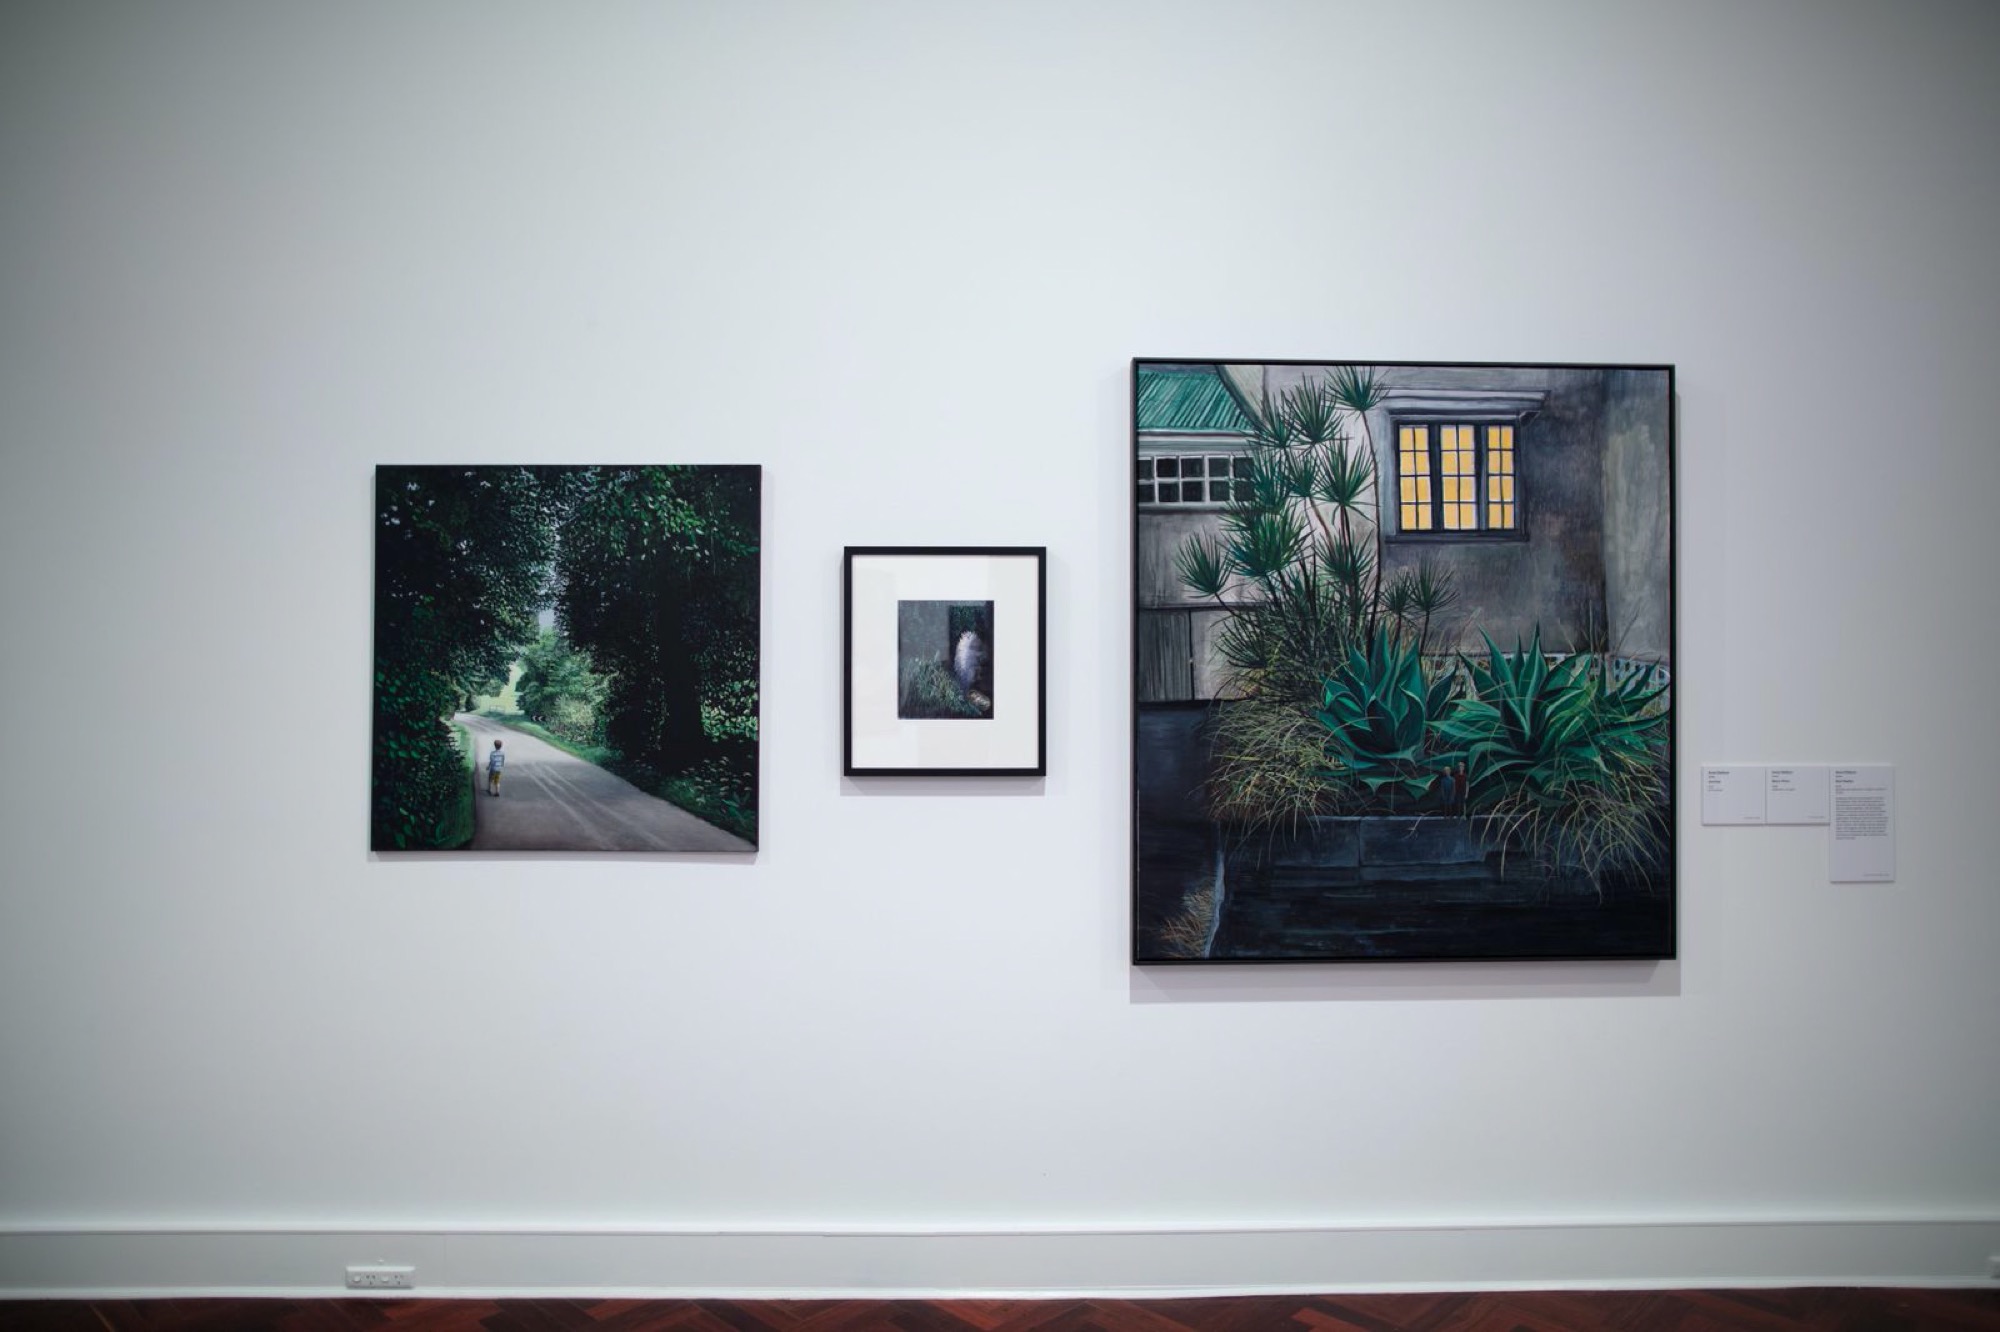 (left to right) Anne Wallace, Journey, 2013. Oil on canvas, 100 x 100cm; Anne Wallace Moon River, 2008. Oil on canvas, 30 x 22cm; Anne Wallace, Boo Radley, 2018. Gouache and watercolour on paper mounted on canvas, 142 x 130 cm. Courtesy of the Art Gallery of Ballarat.